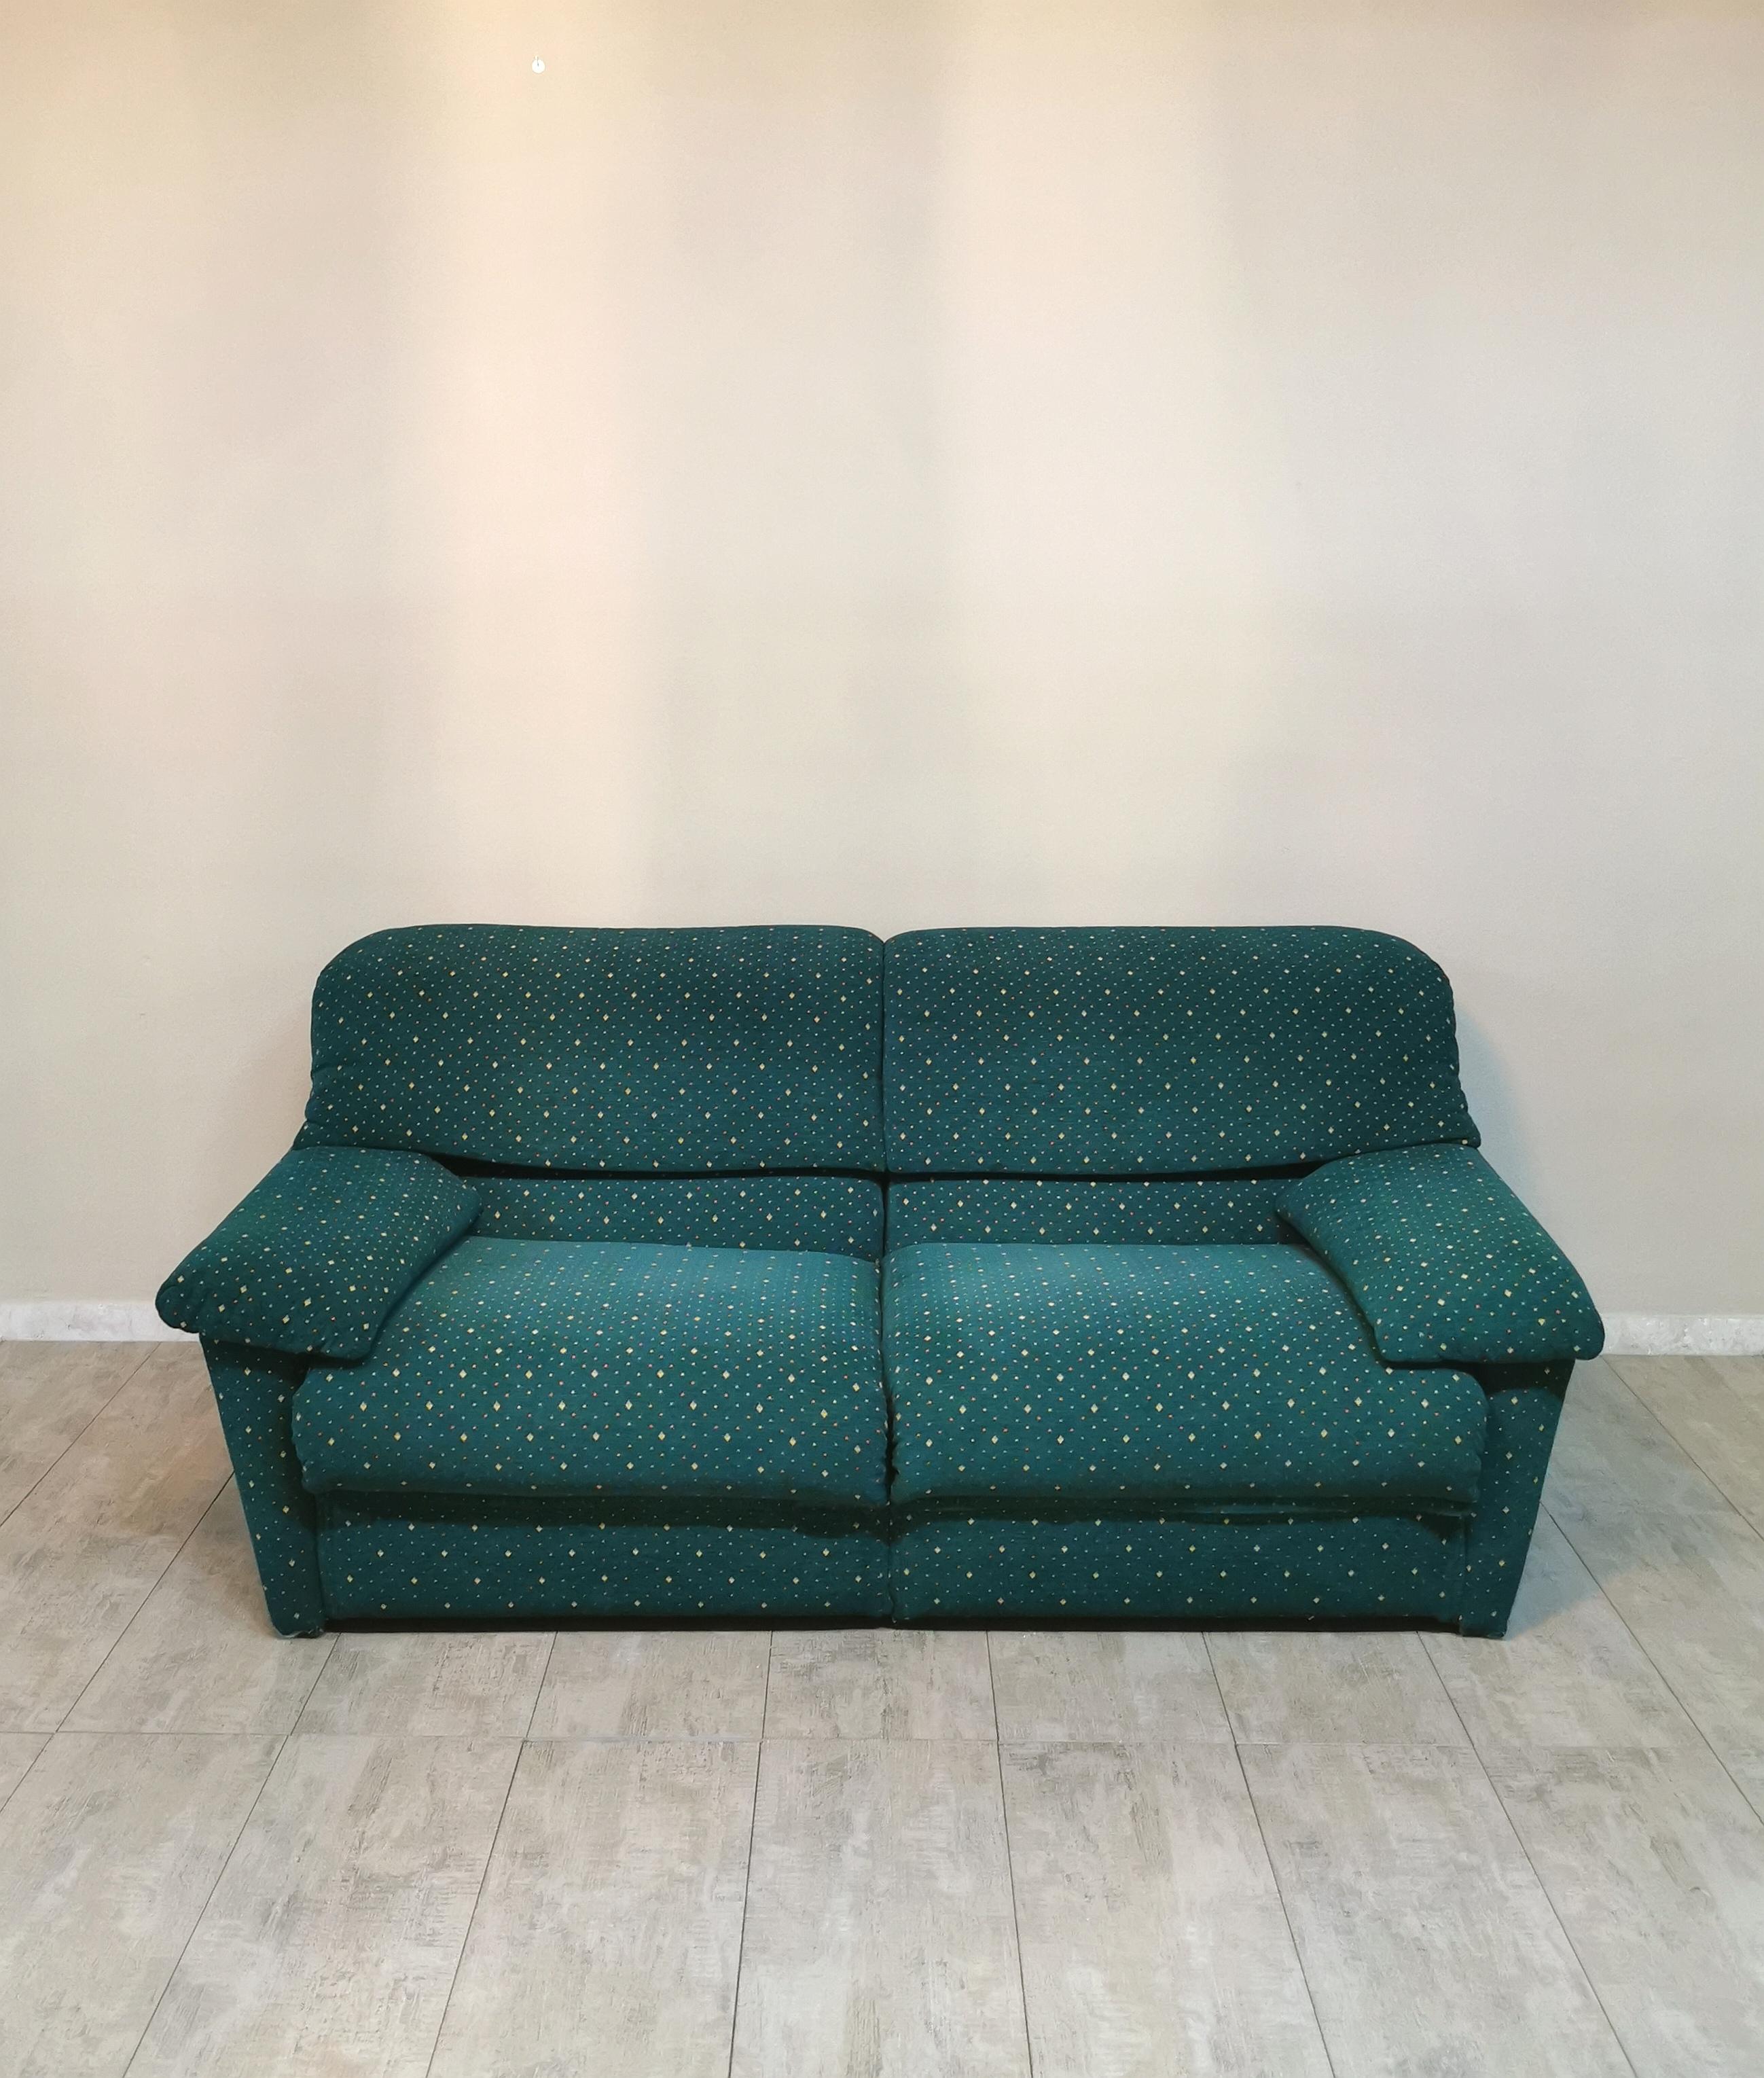 Sofa produced by the Italian company Pol74 postmodern 3-seat in wood green striped velvet depicting small rhombus designs in relief. The sofa has reclining headrests and removable and removable cushions with tear and zip, and also 4 plastic feet.